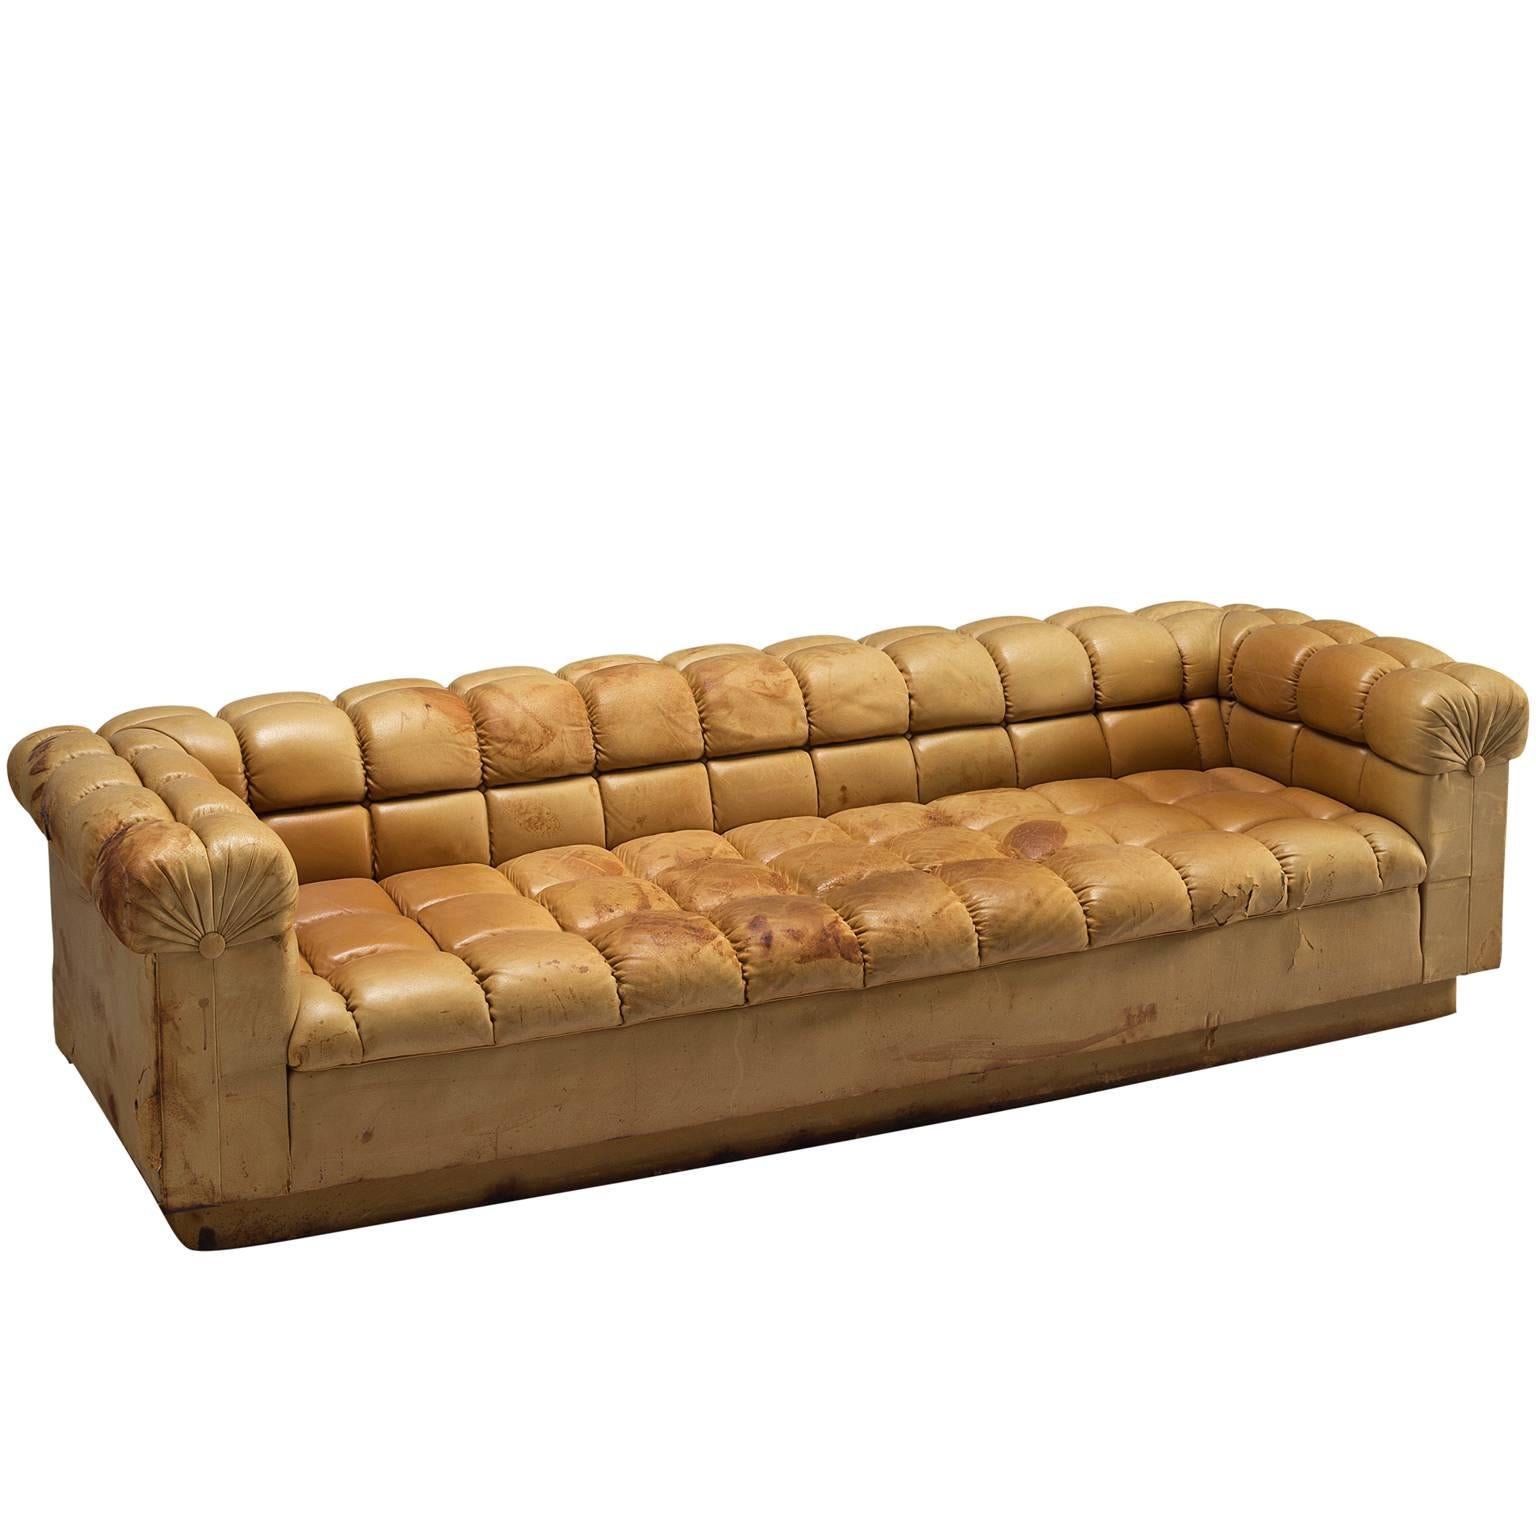 Edward Wormley 'Party' Sofa in Cognac Leather